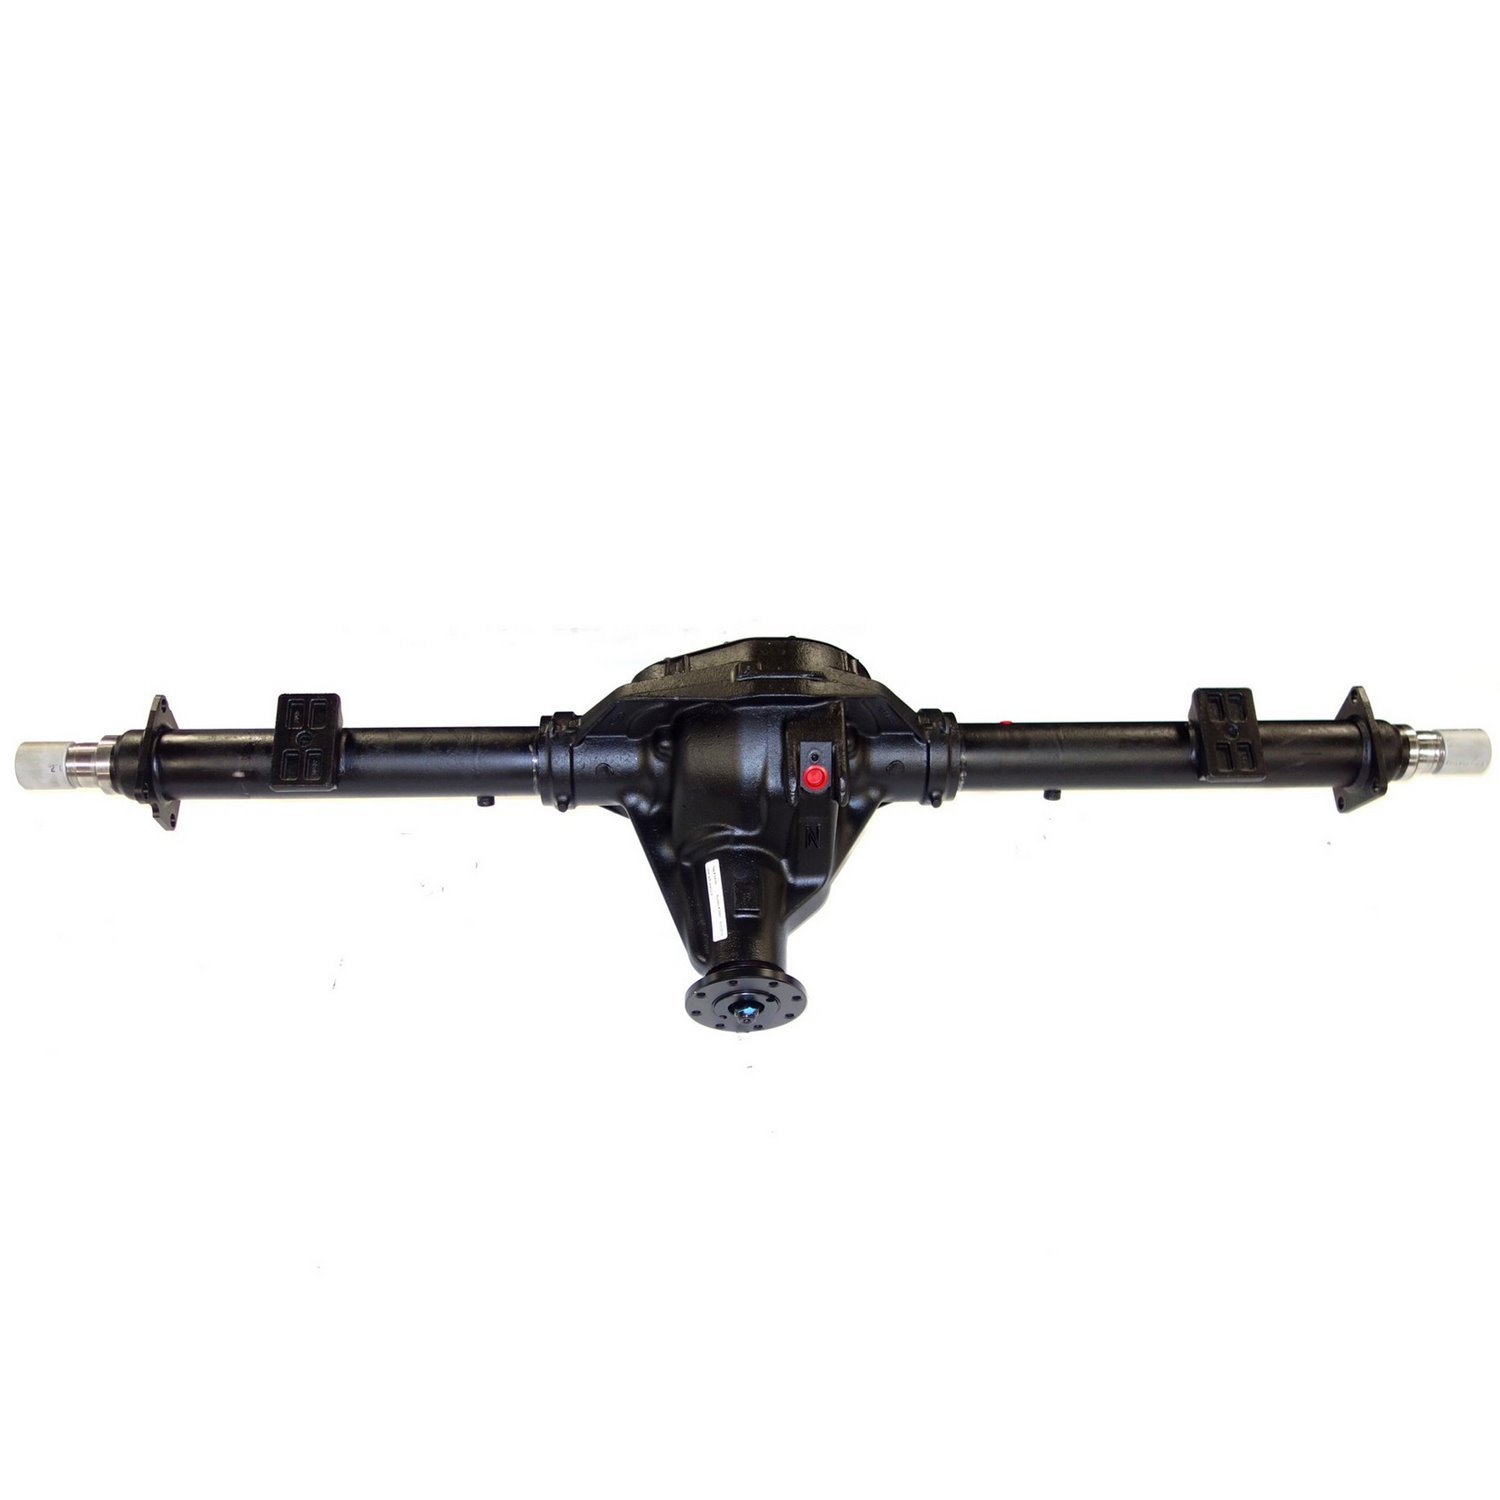 Remanufactured Complete Axle Assembly for 10.5" 08-10 F250 & F350 6.4l, SRW 3.55